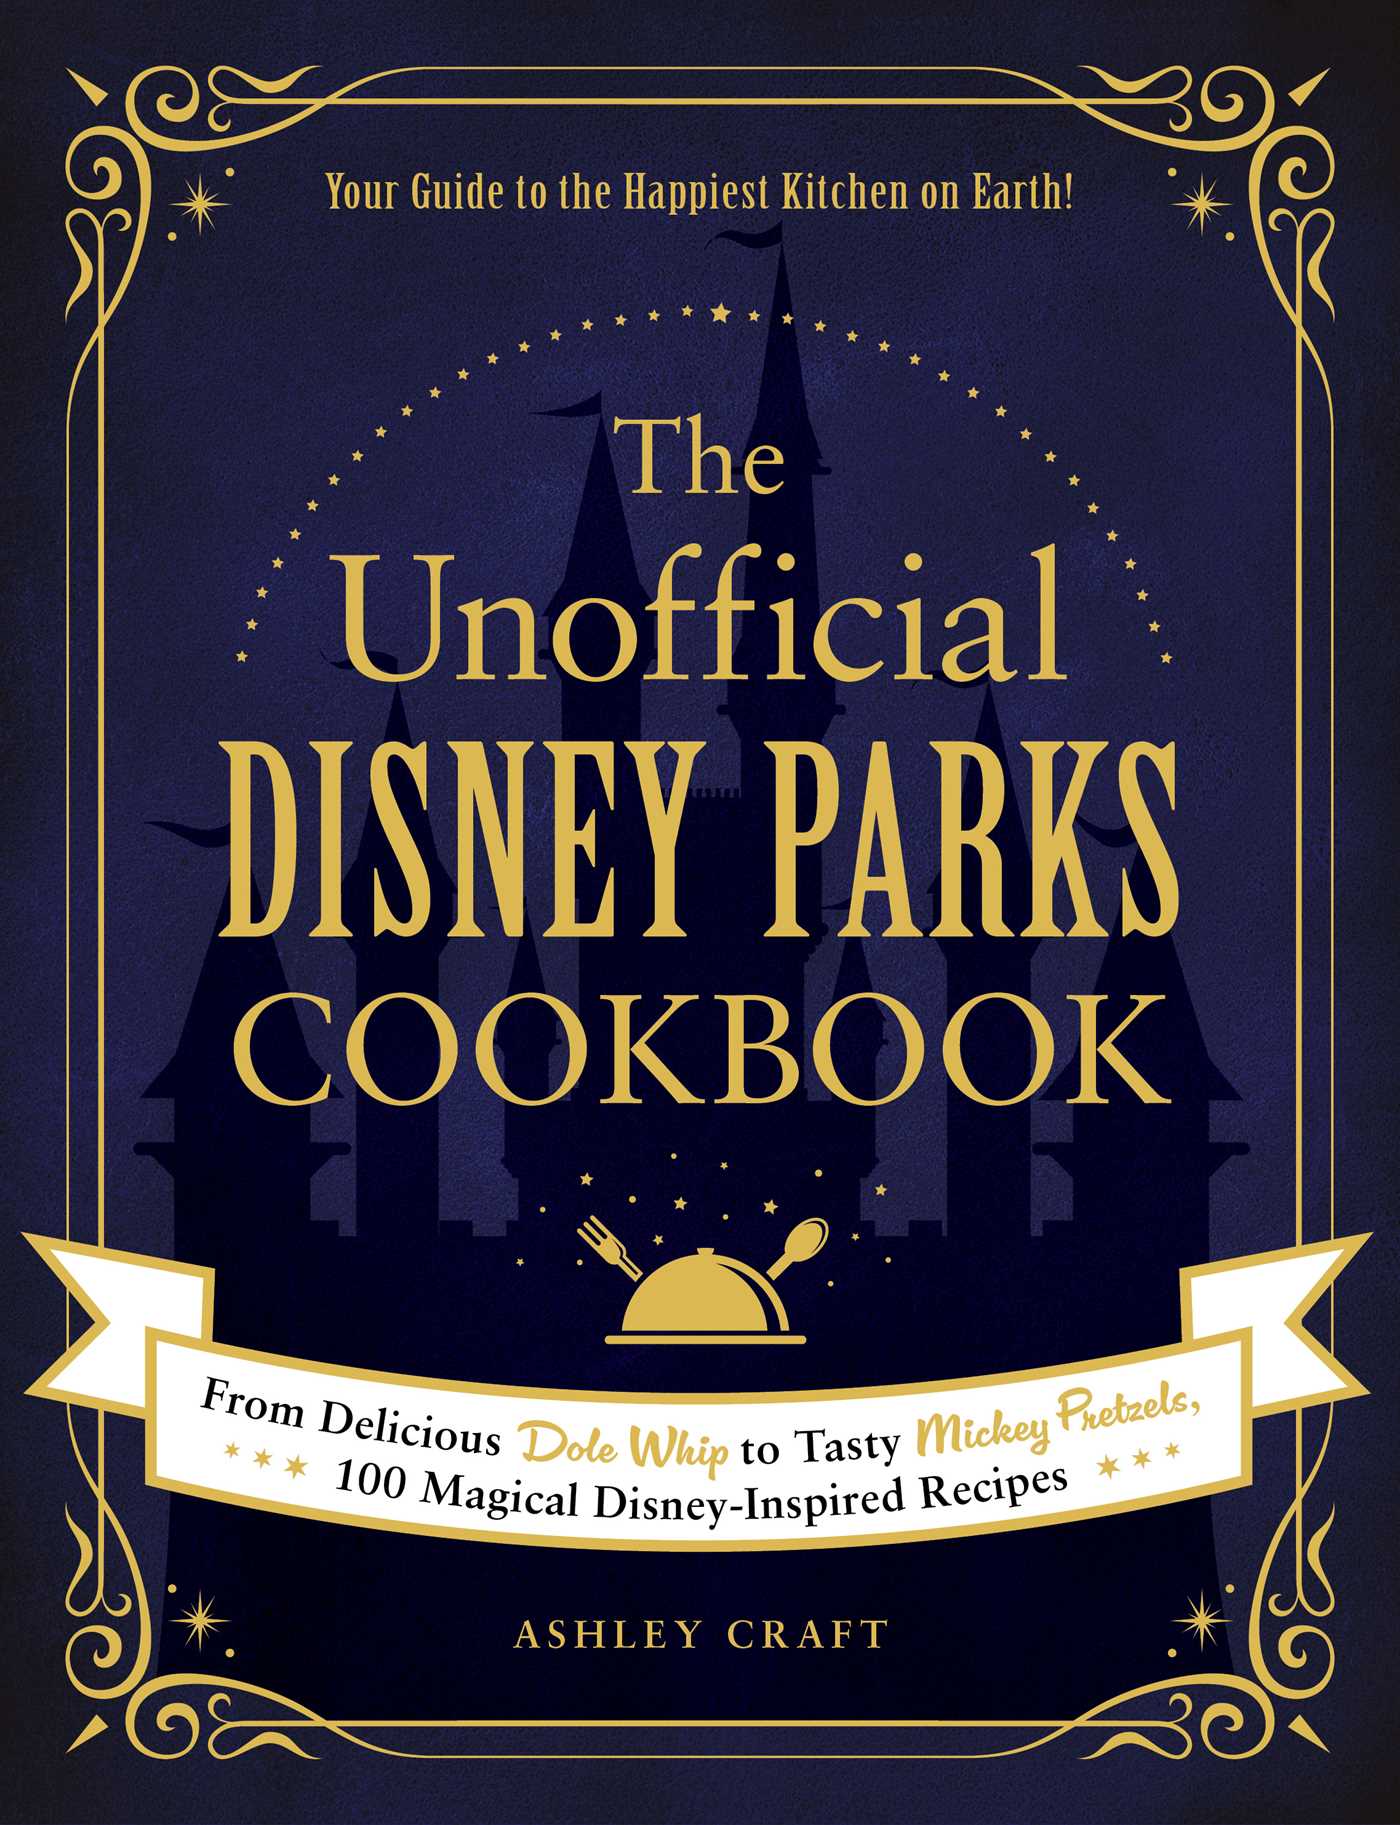 Unofficial Cookbook Gift Series: The Unofficial Disney Parks Cookbook : From Delicious Dole Whip to Tasty Mickey Pretzels, 100 Magical Disney-Inspired Recipes (Hardcover) - image 1 of 1